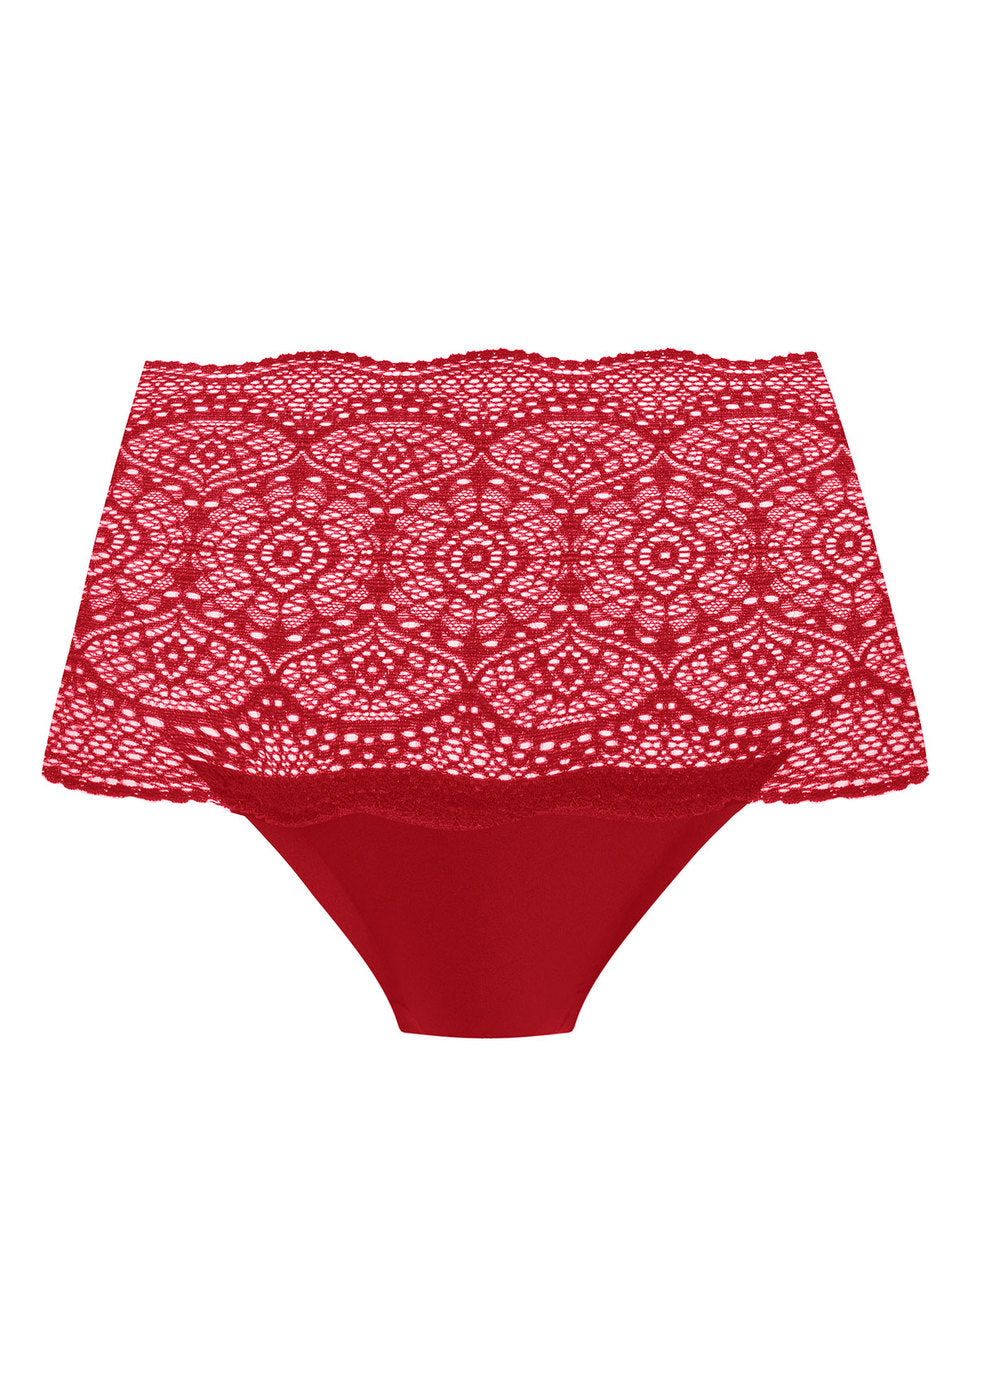 Lace Ease Invisible Stretch Full Brief FL2330 RED - Red